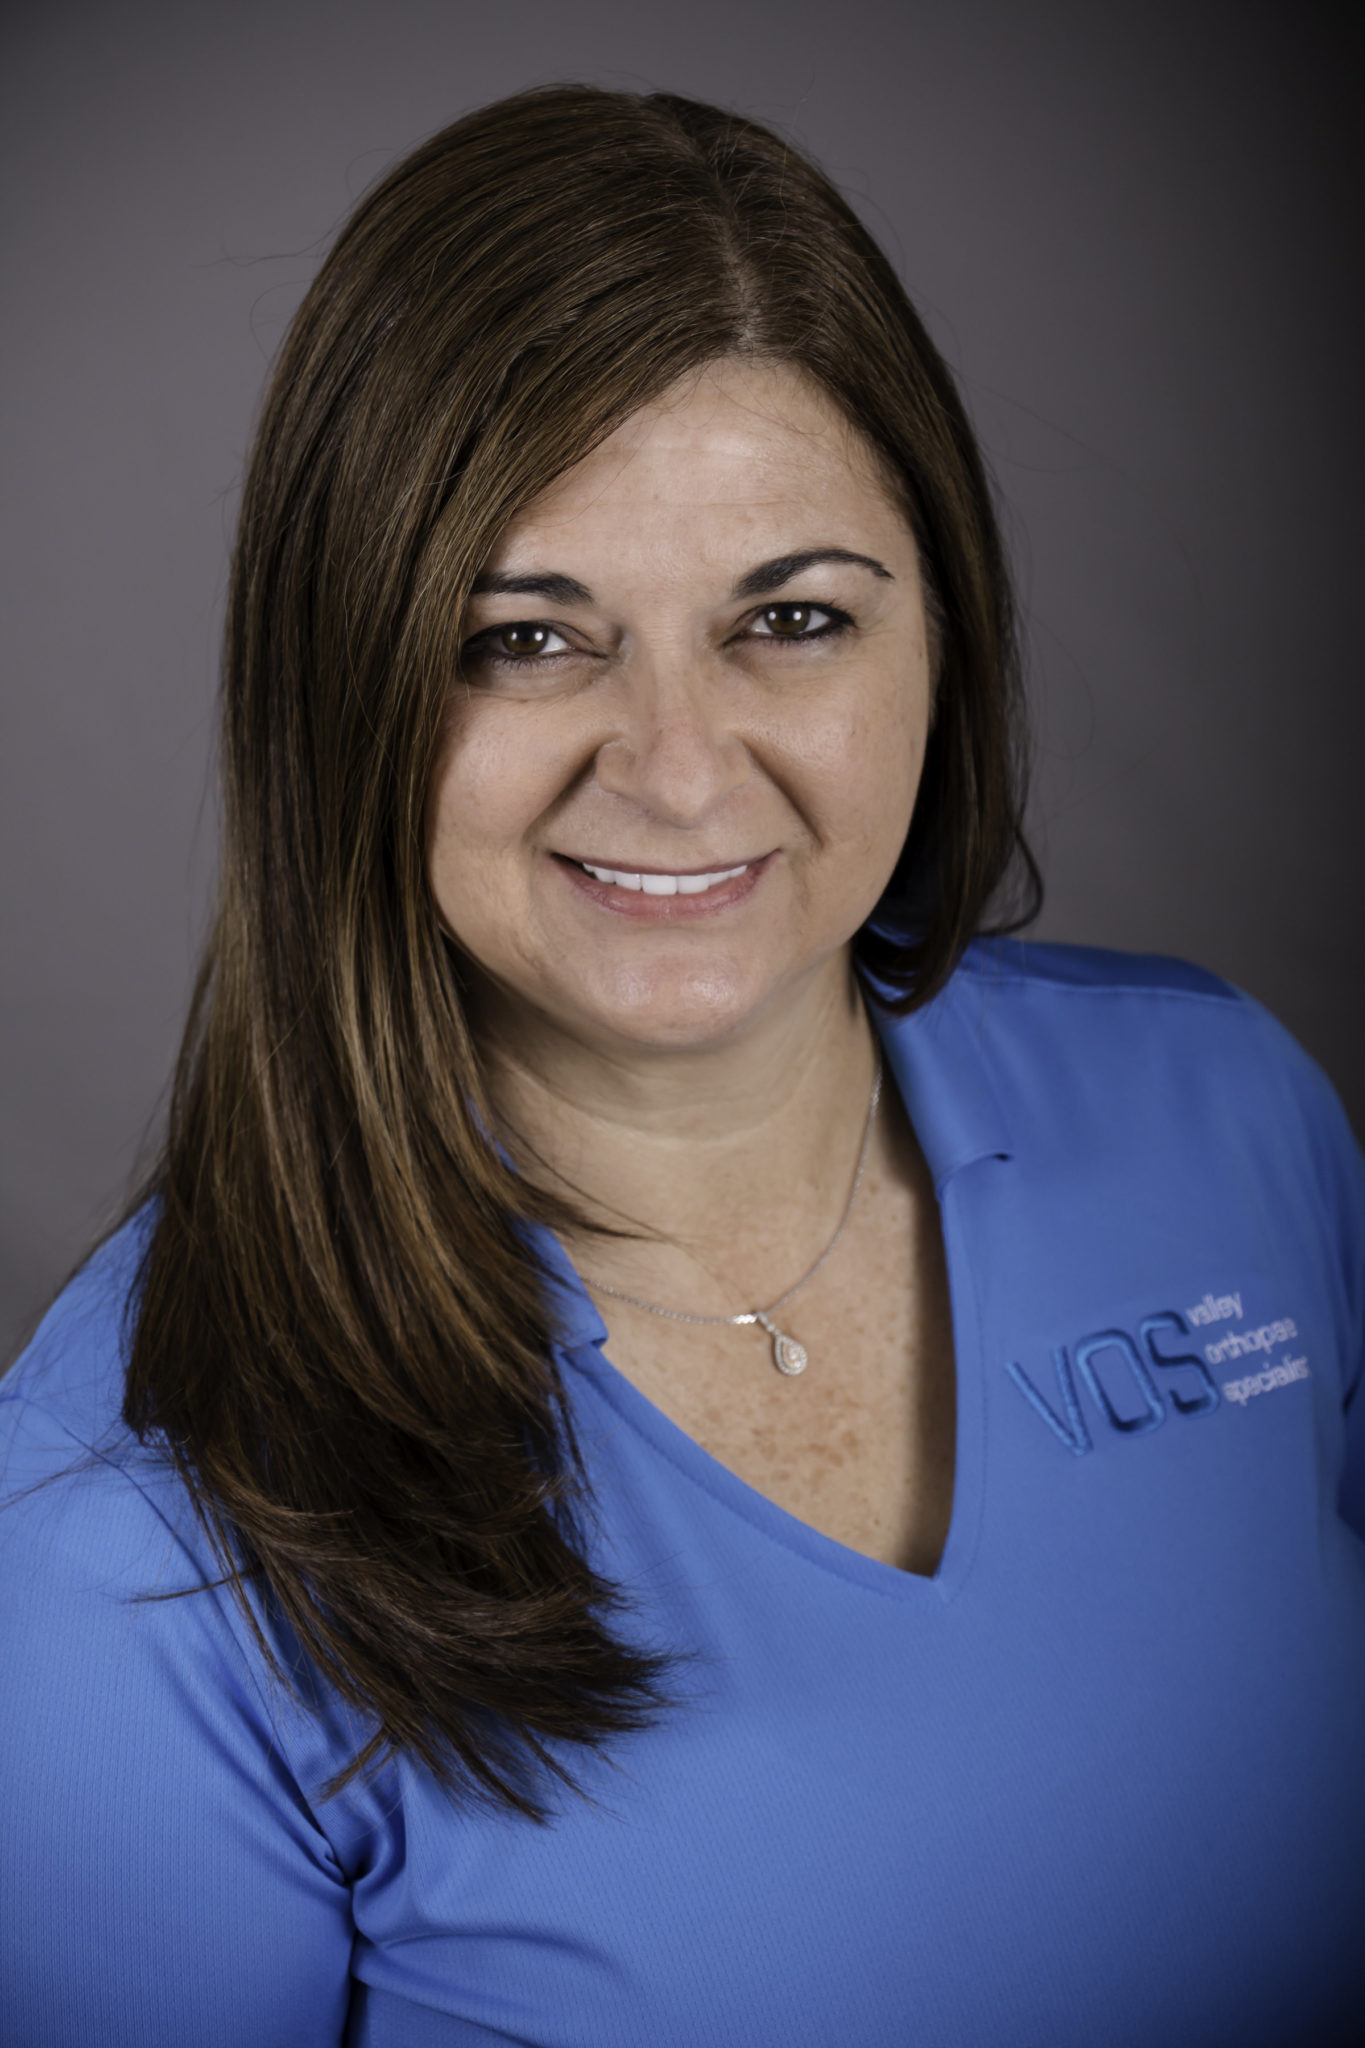 Val Hauptmann, PTA - Physical Therapist Assistant